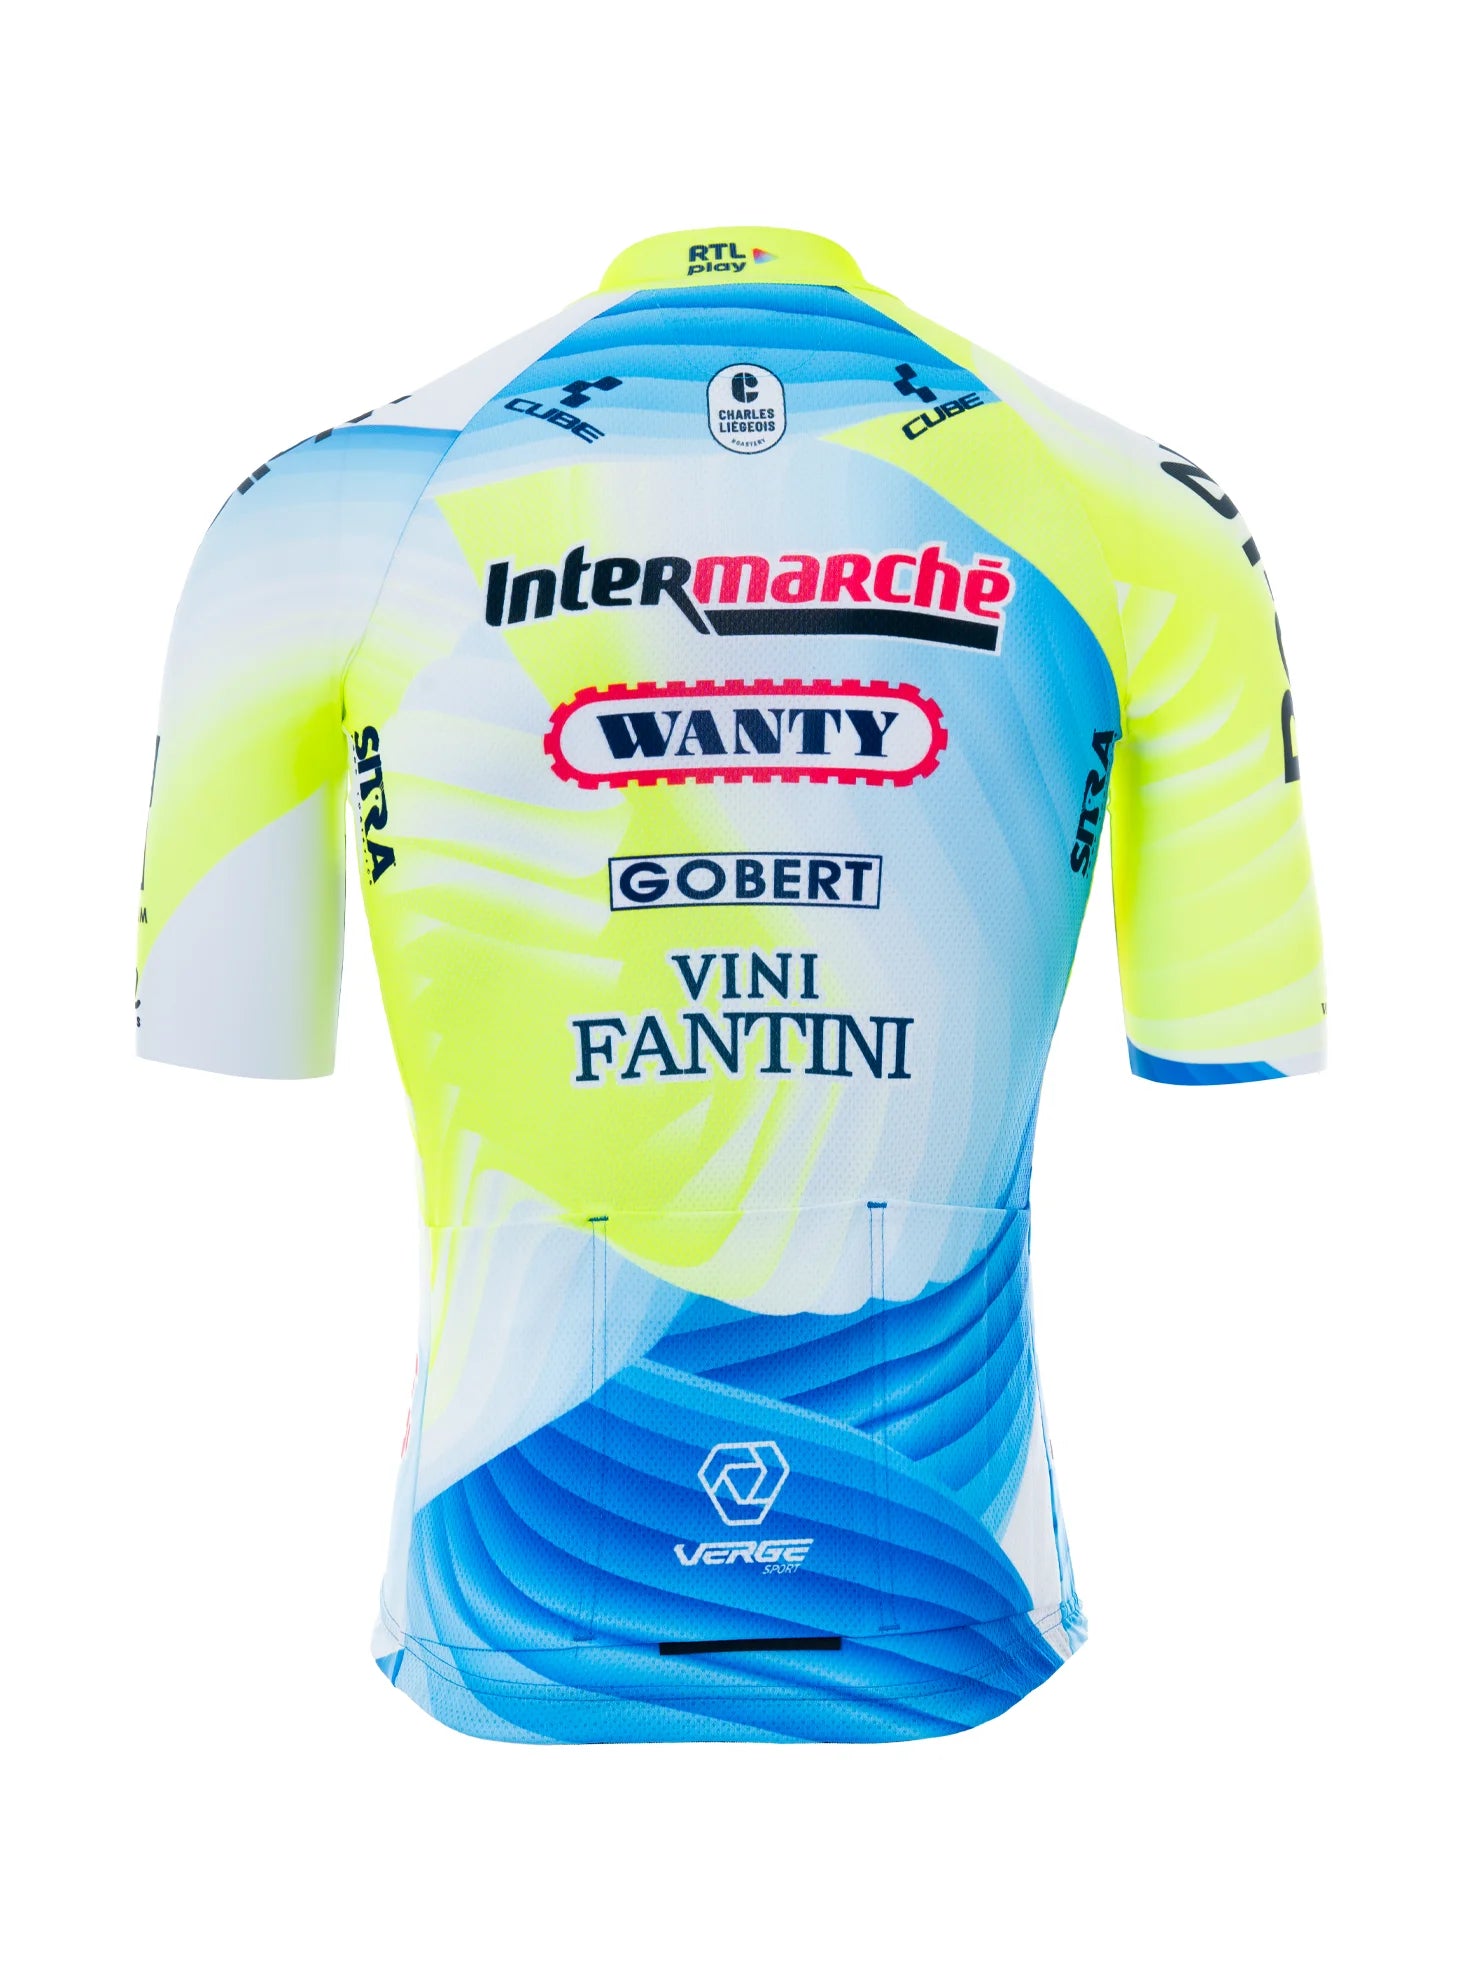 INTERMARCHÉ-WANTY LIMITED EDITION GIRO JERSEY + TOWEL